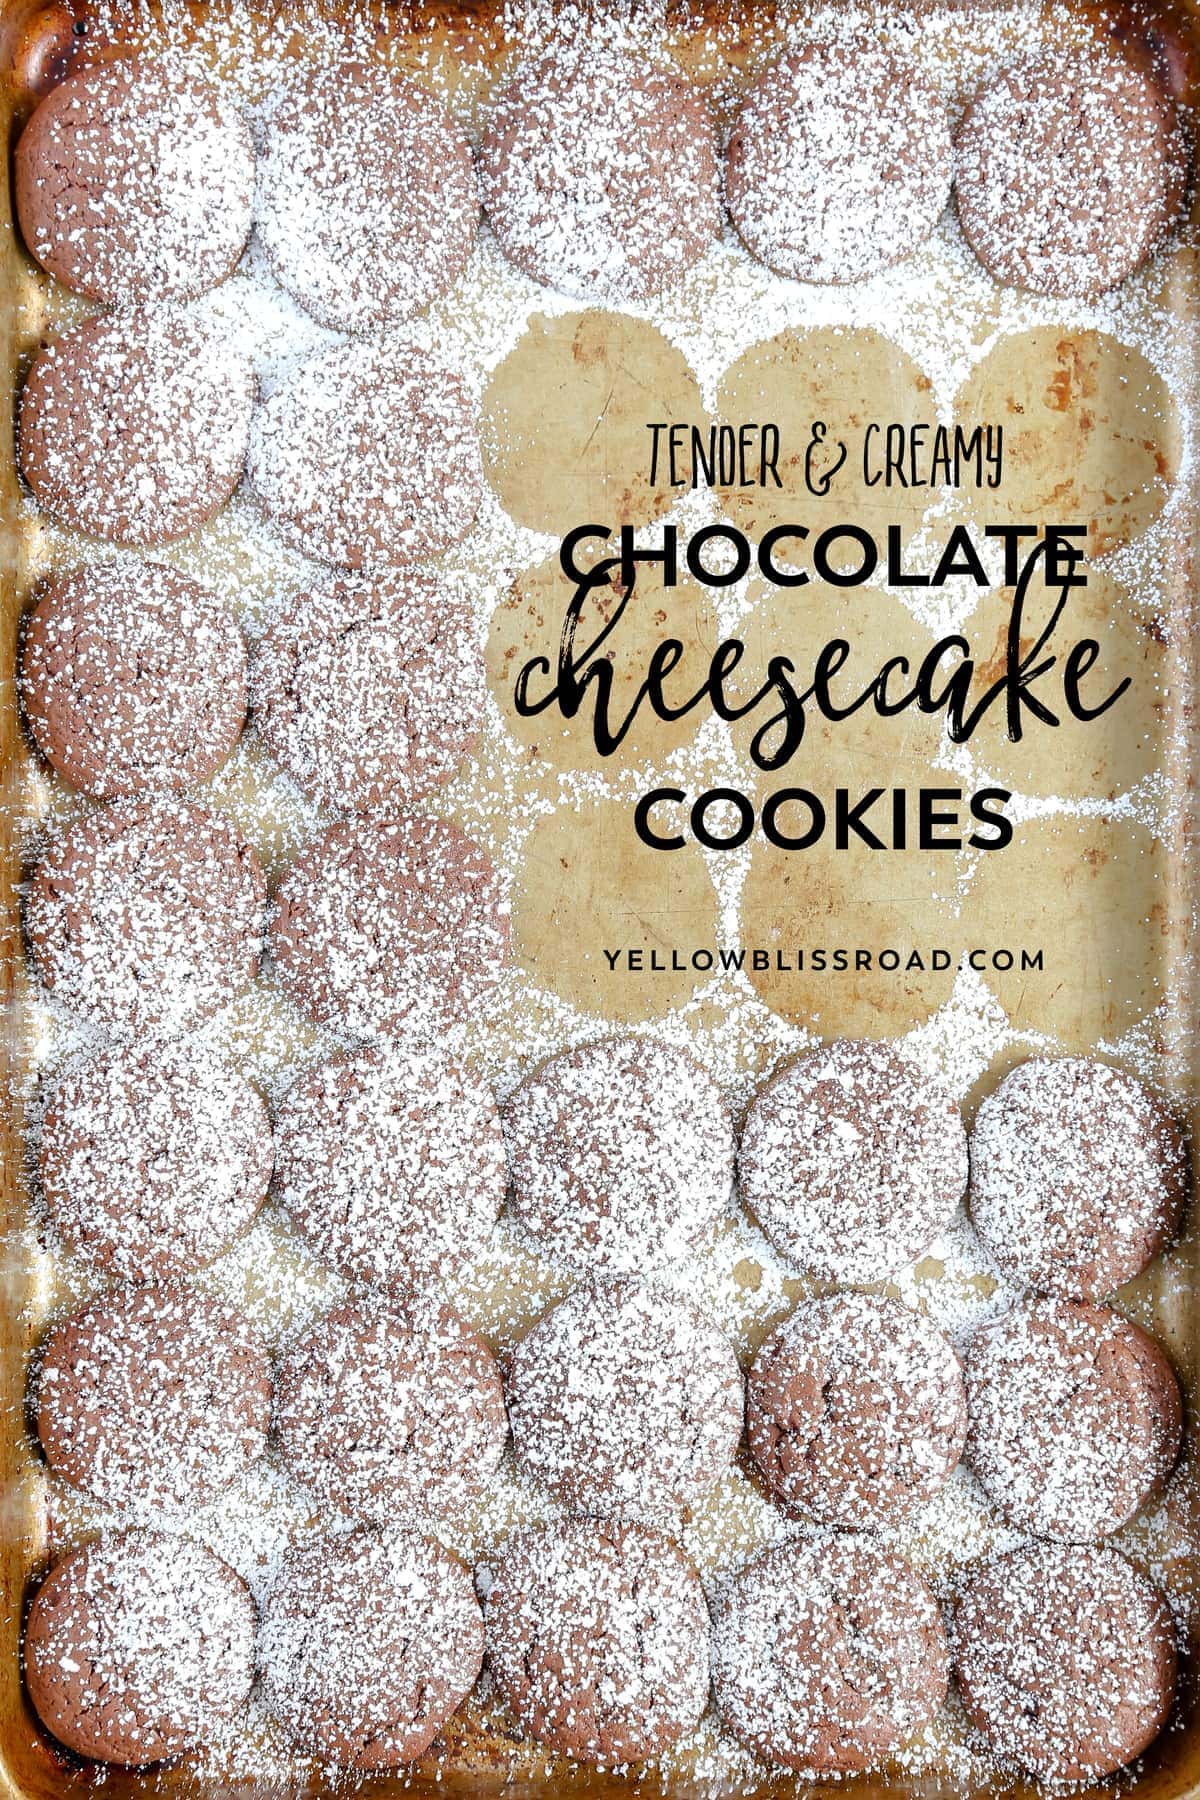 Your new favorite cookie! These Chocolate Cheesecake Cookies are super creamy and tender and melt in your mouth delicious!